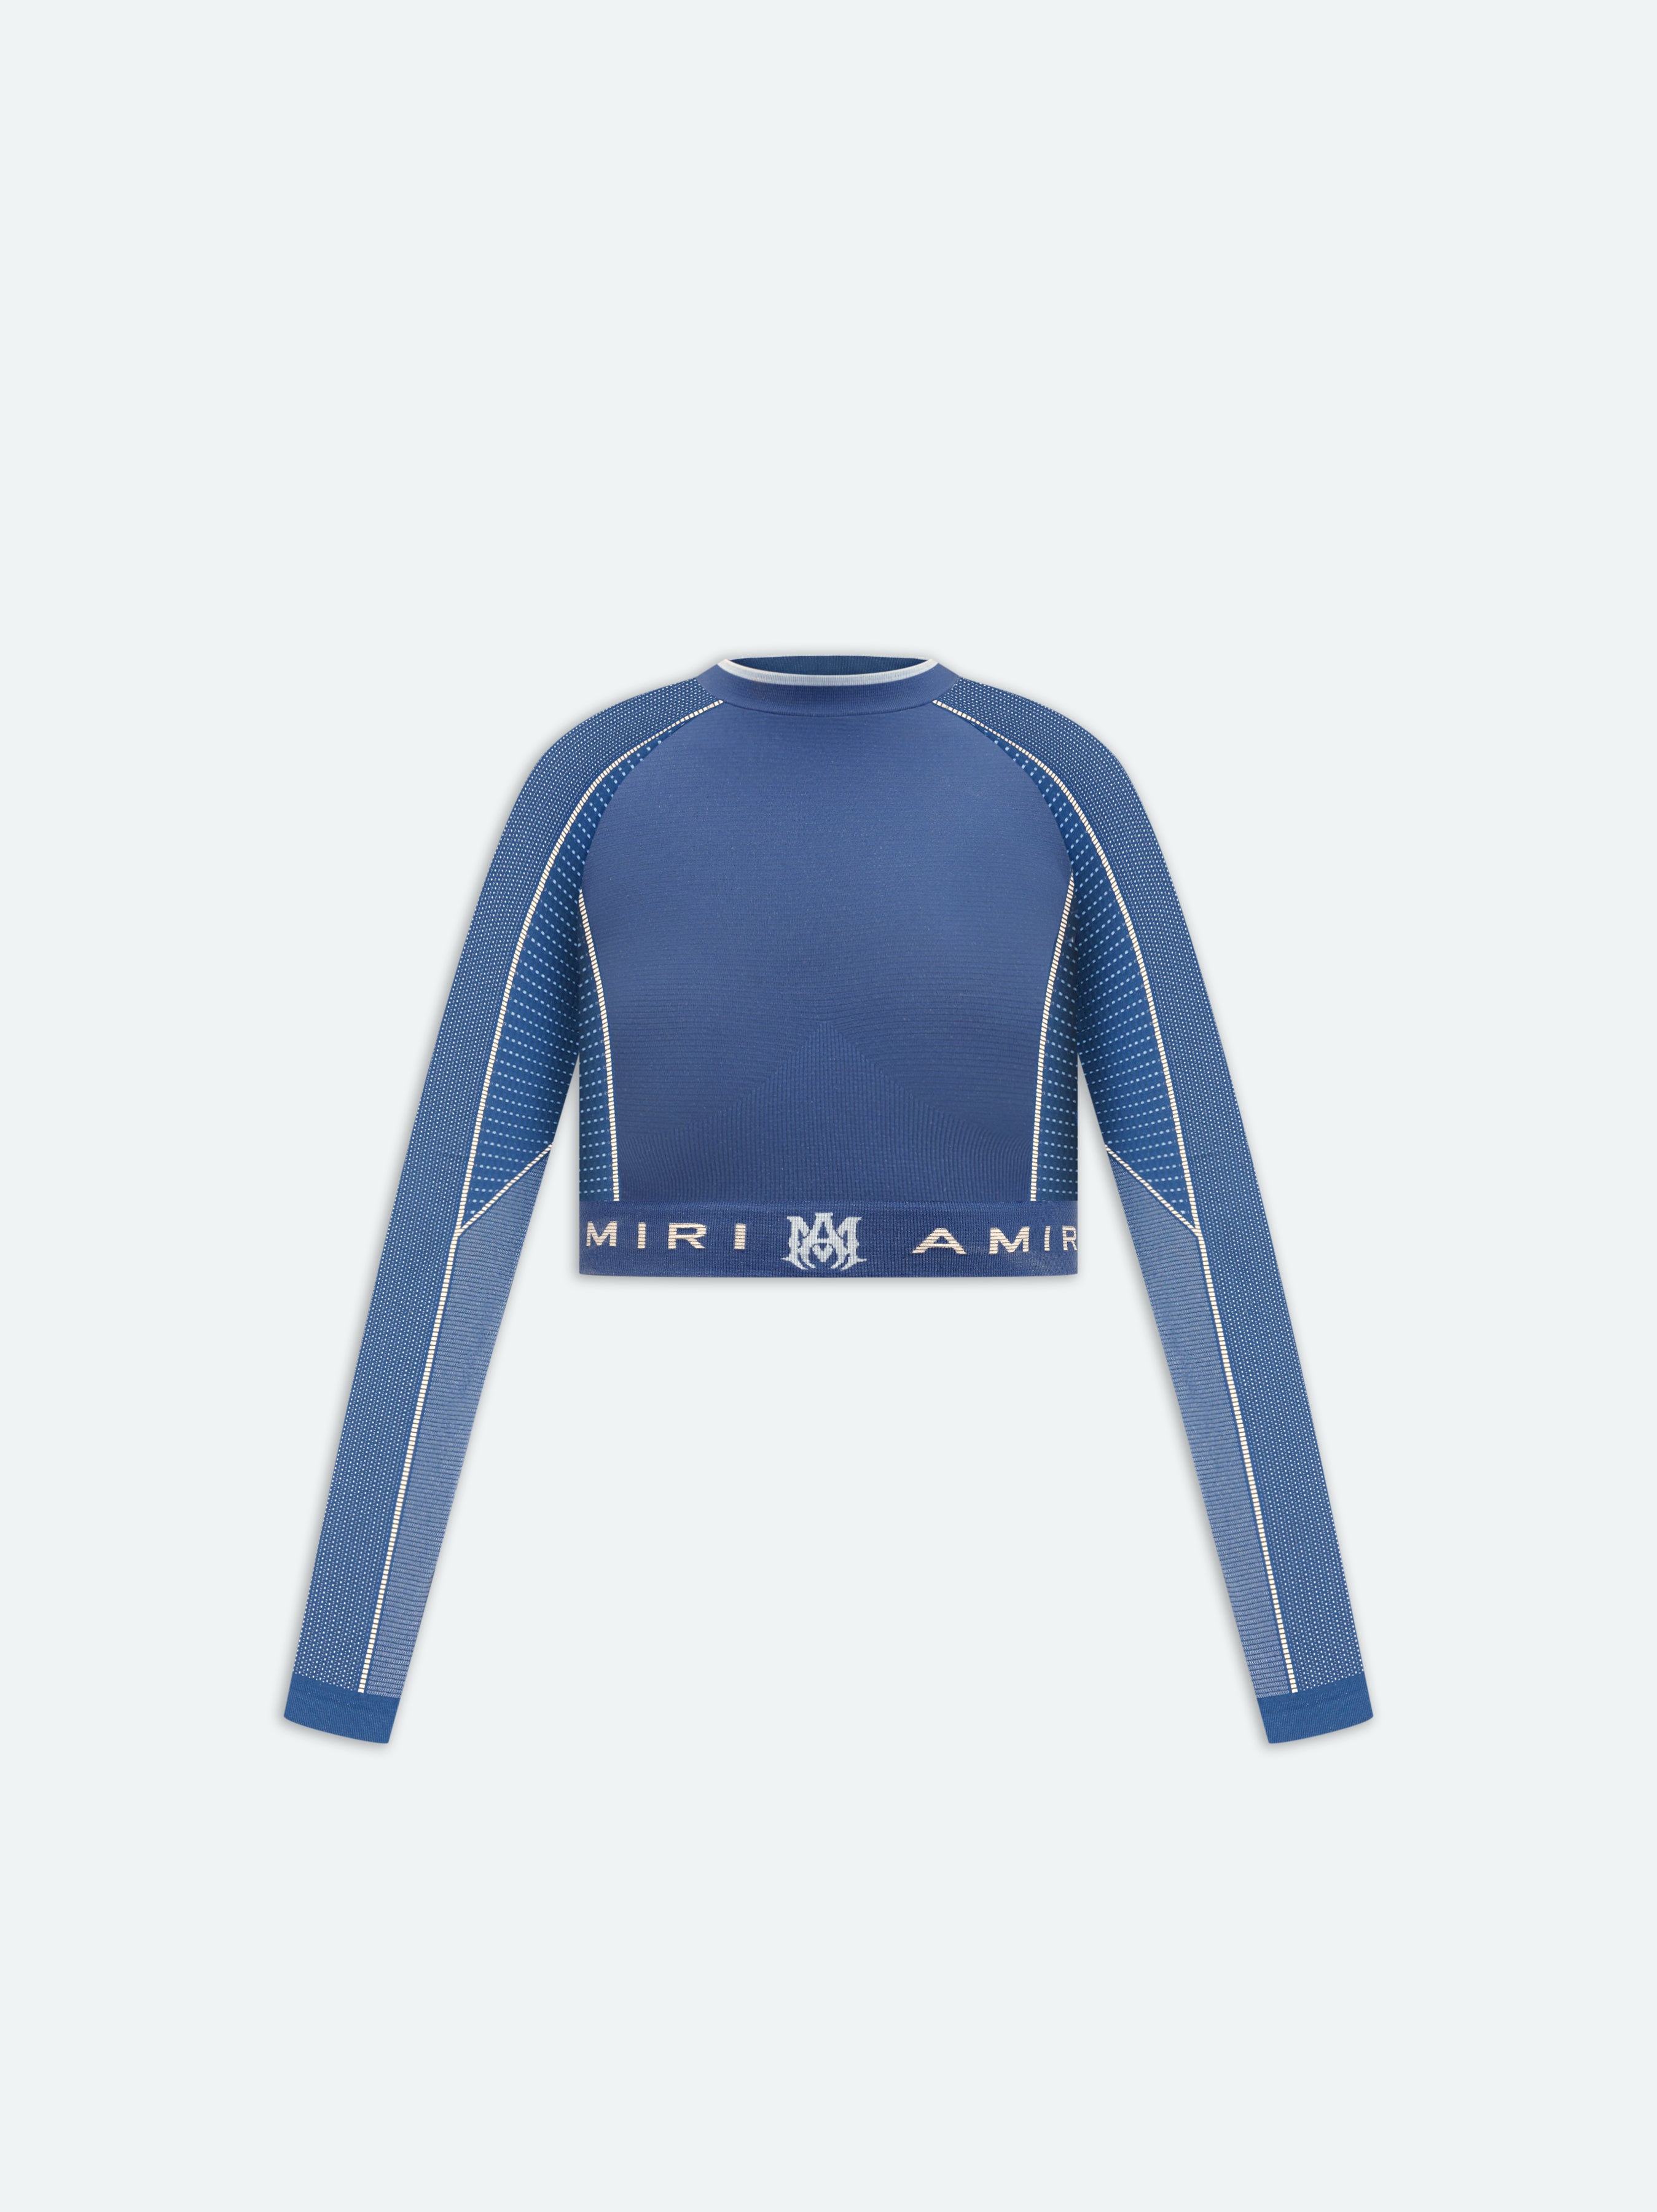 Product WOMEN - MA SEAMLESS CROPPED LONG SLEEVE TOP - Dark Blue featured image